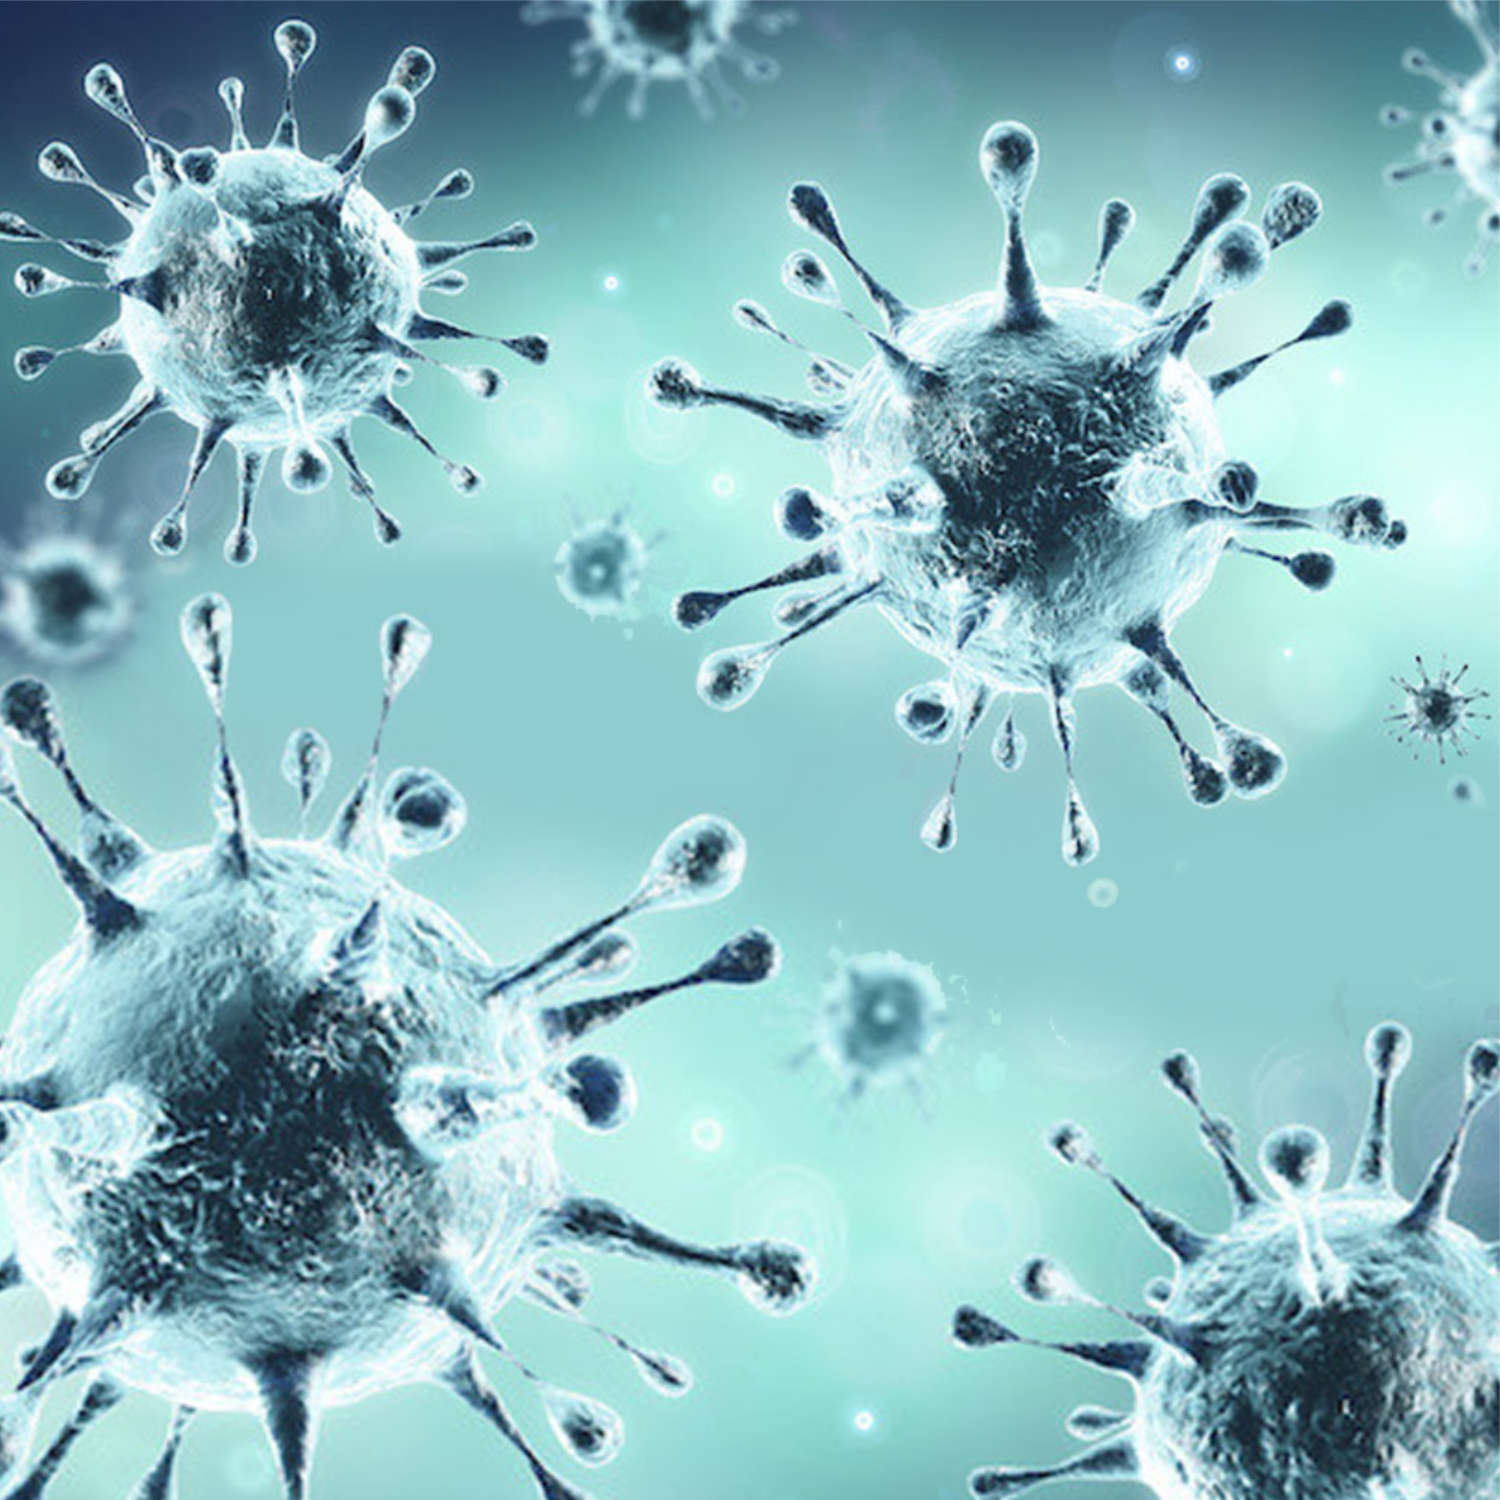 Coronavirus outbreak has impacted the live events industry.